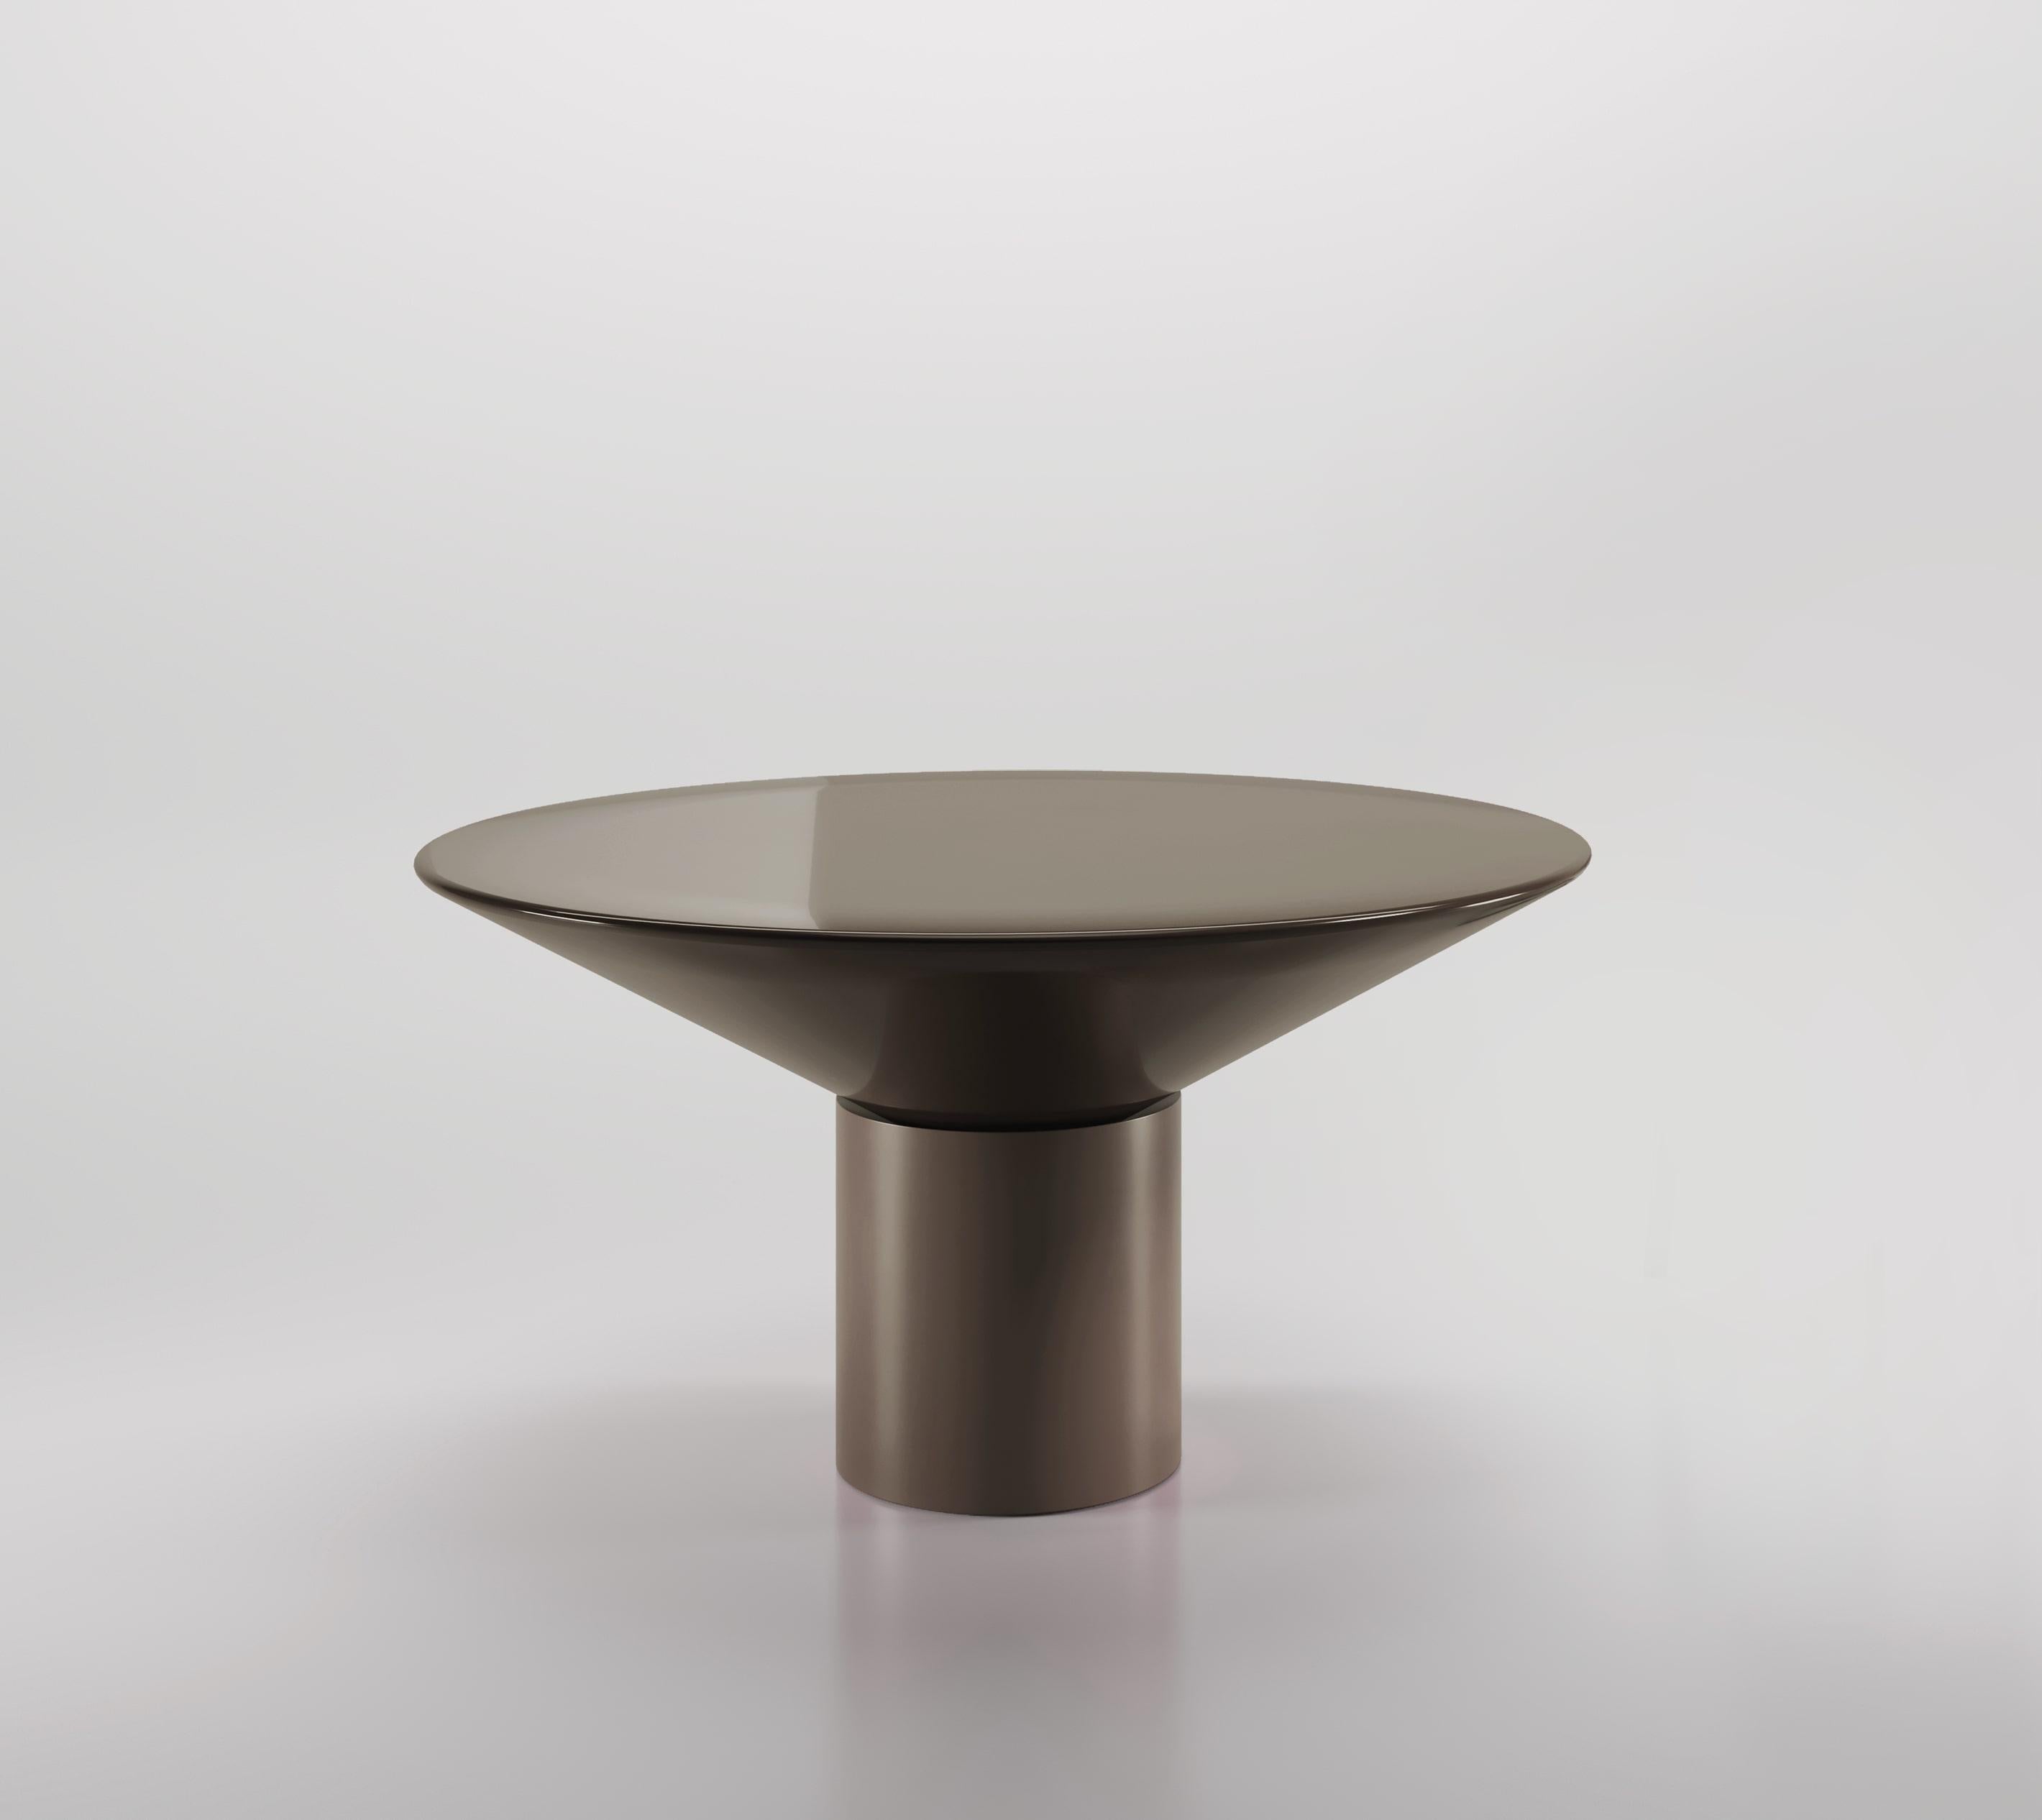 Silo Dining Table is an impactful piece designed to explore the usual characteristics of a dining table. For the Silo Dining Table the base and top communicate and coincide harmoniously, both working together to create a piece that is as visually